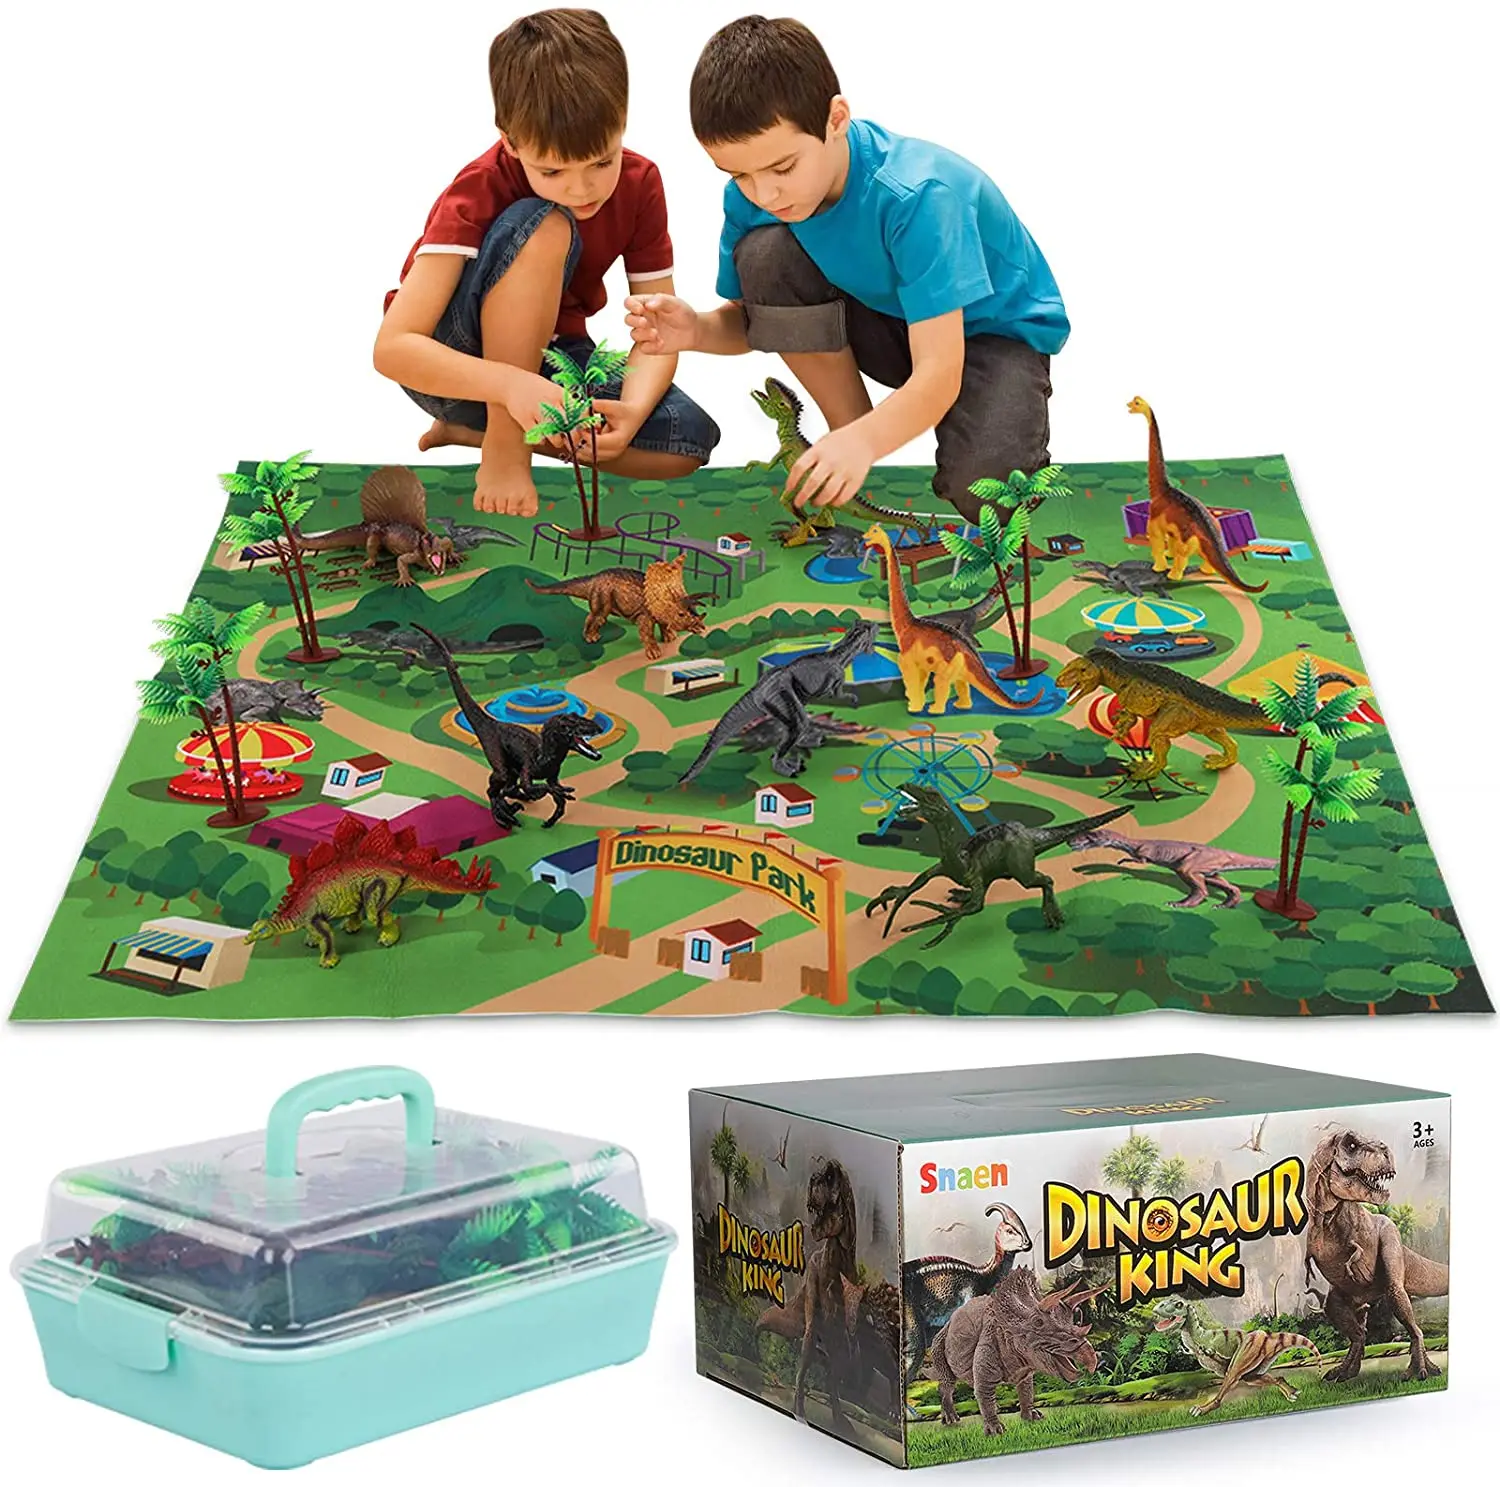 

Jurassic Park Dinosaurs Toy Animal Jungle Set T rex Dinosaur Excavation Educational Boys children toys for kids 2 to 4 years old